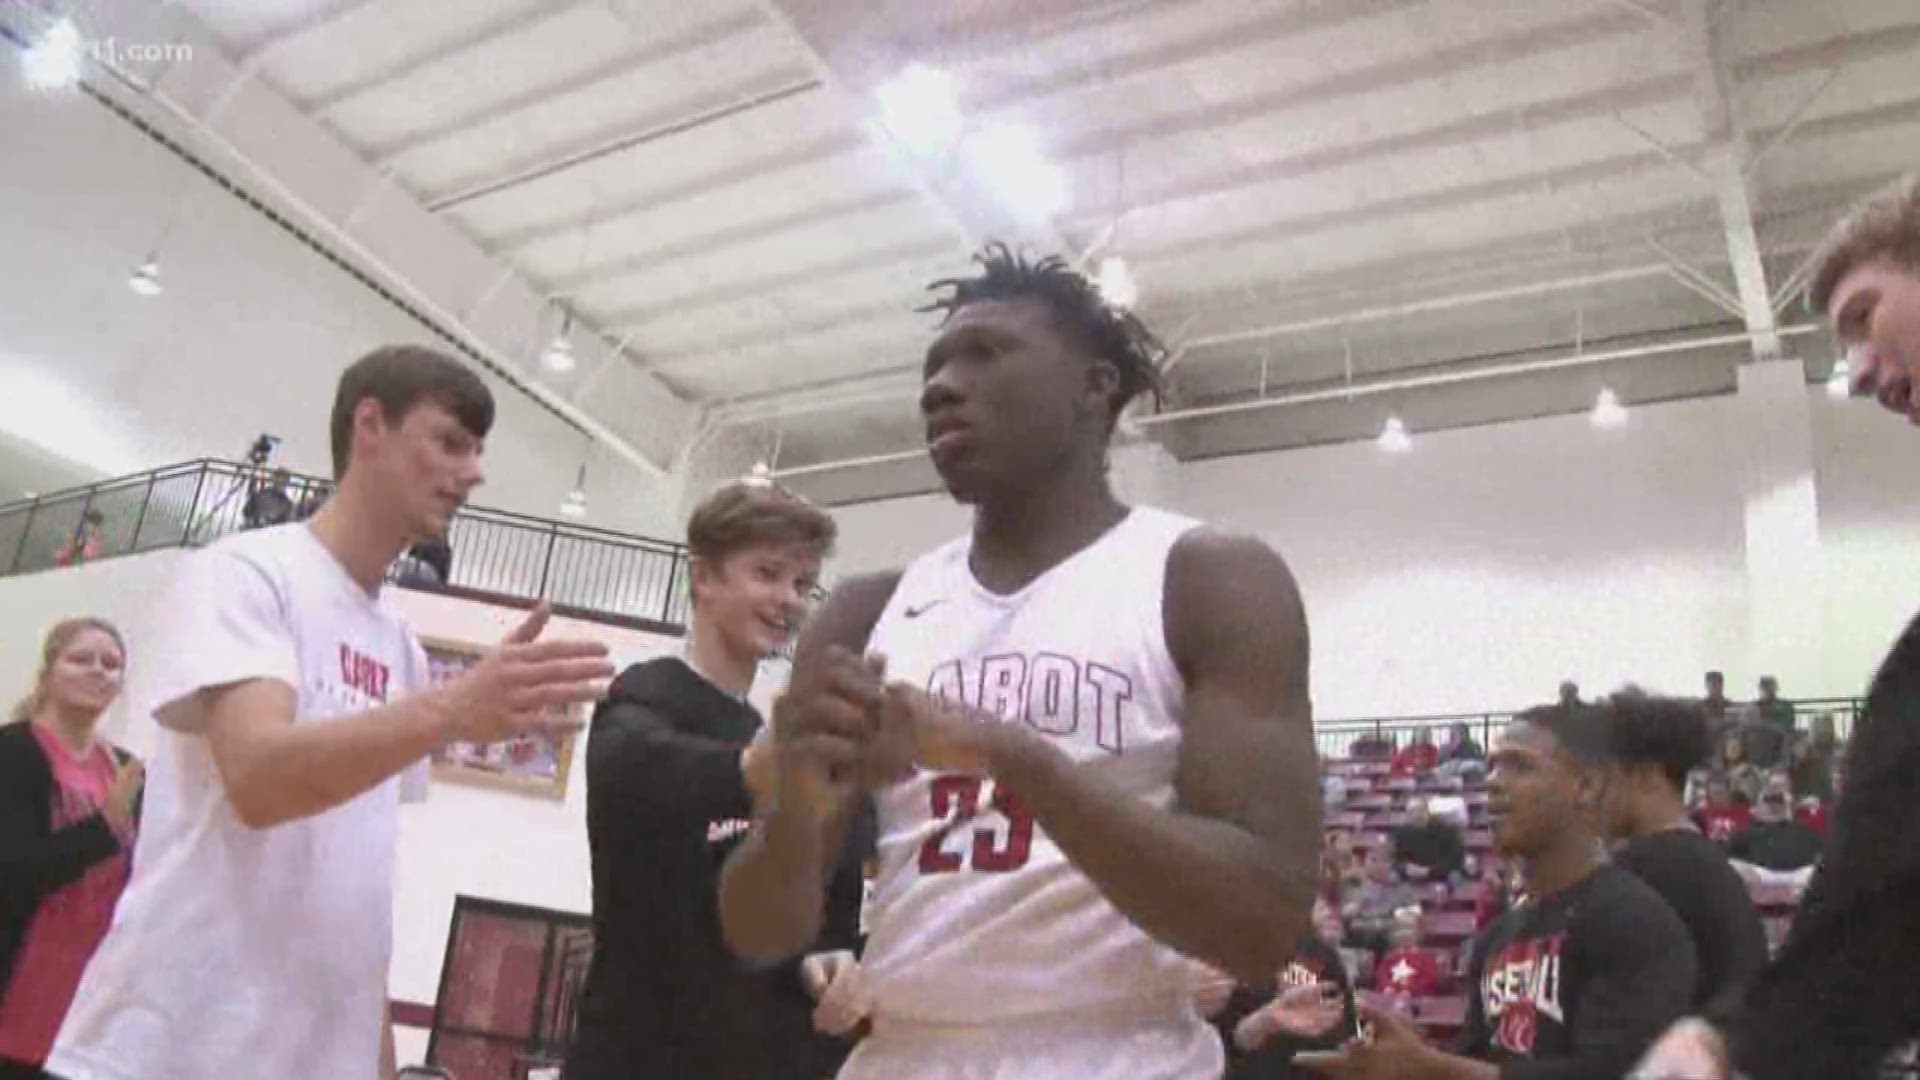 Cabot opens conference season with win over Catholic